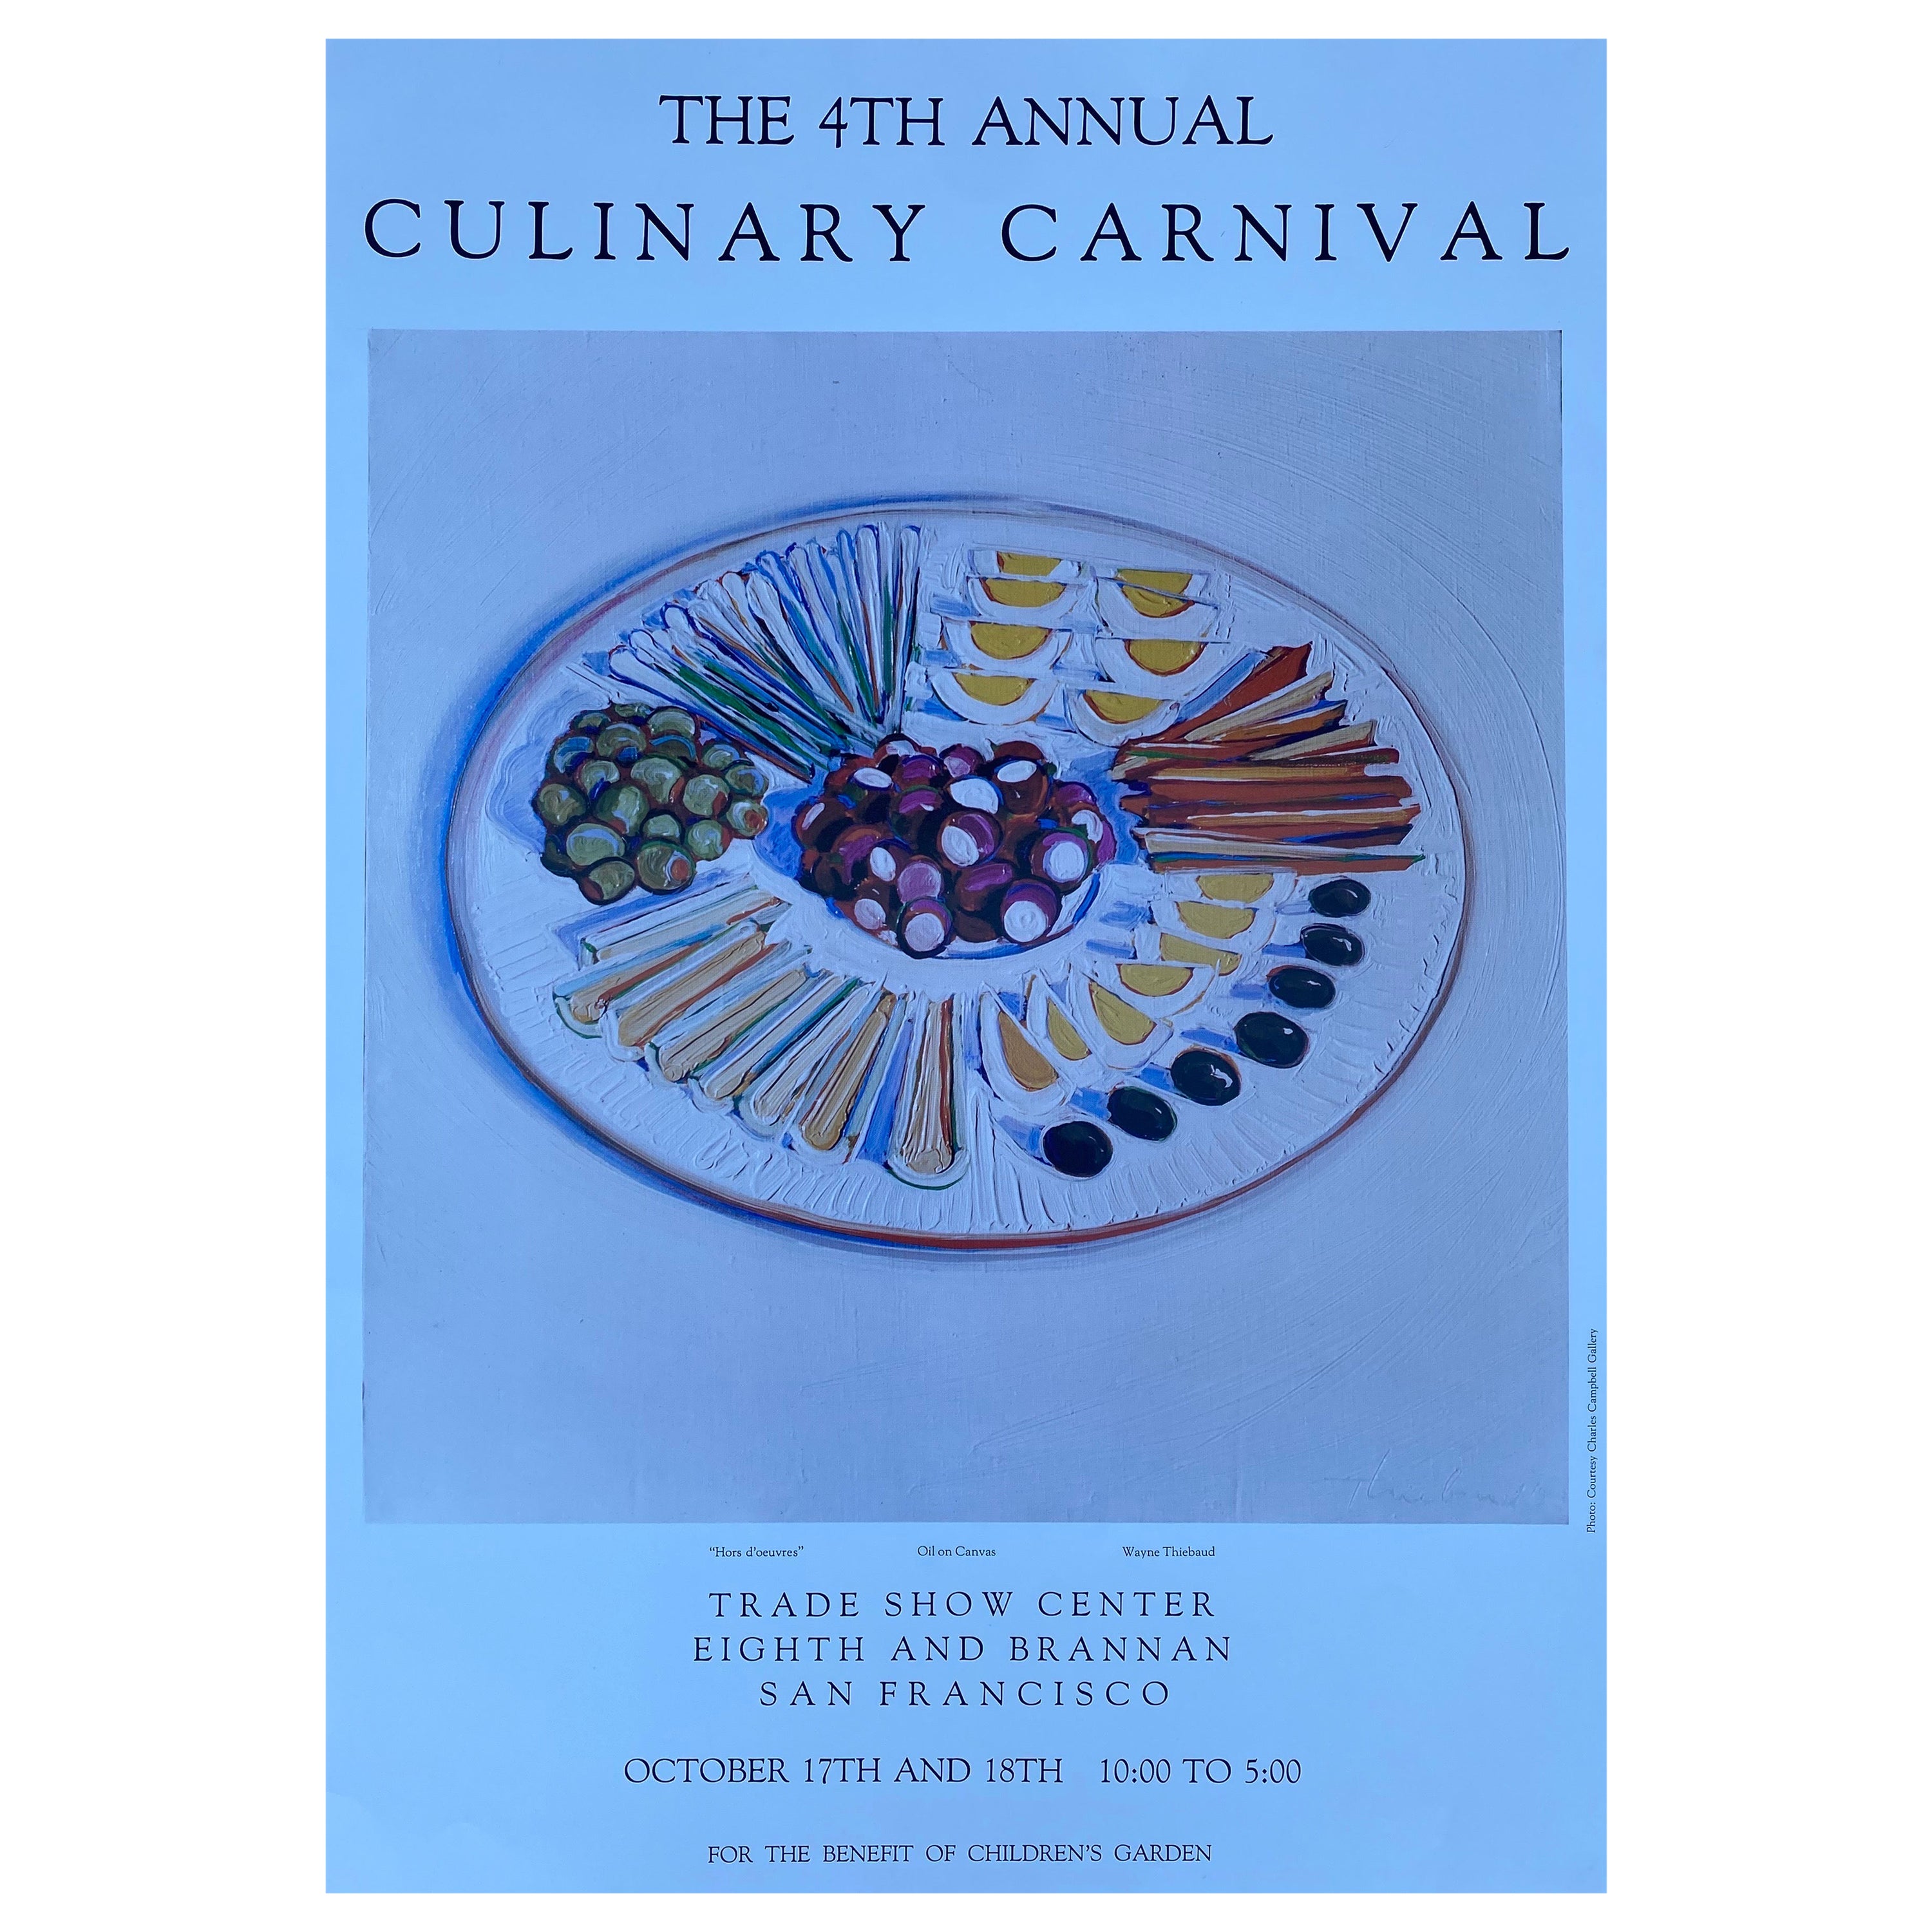 Circa 1980 Wayne Thiebaud "Hors d'Oeuvres" 4th Annual Culinary Carnival Print For Sale